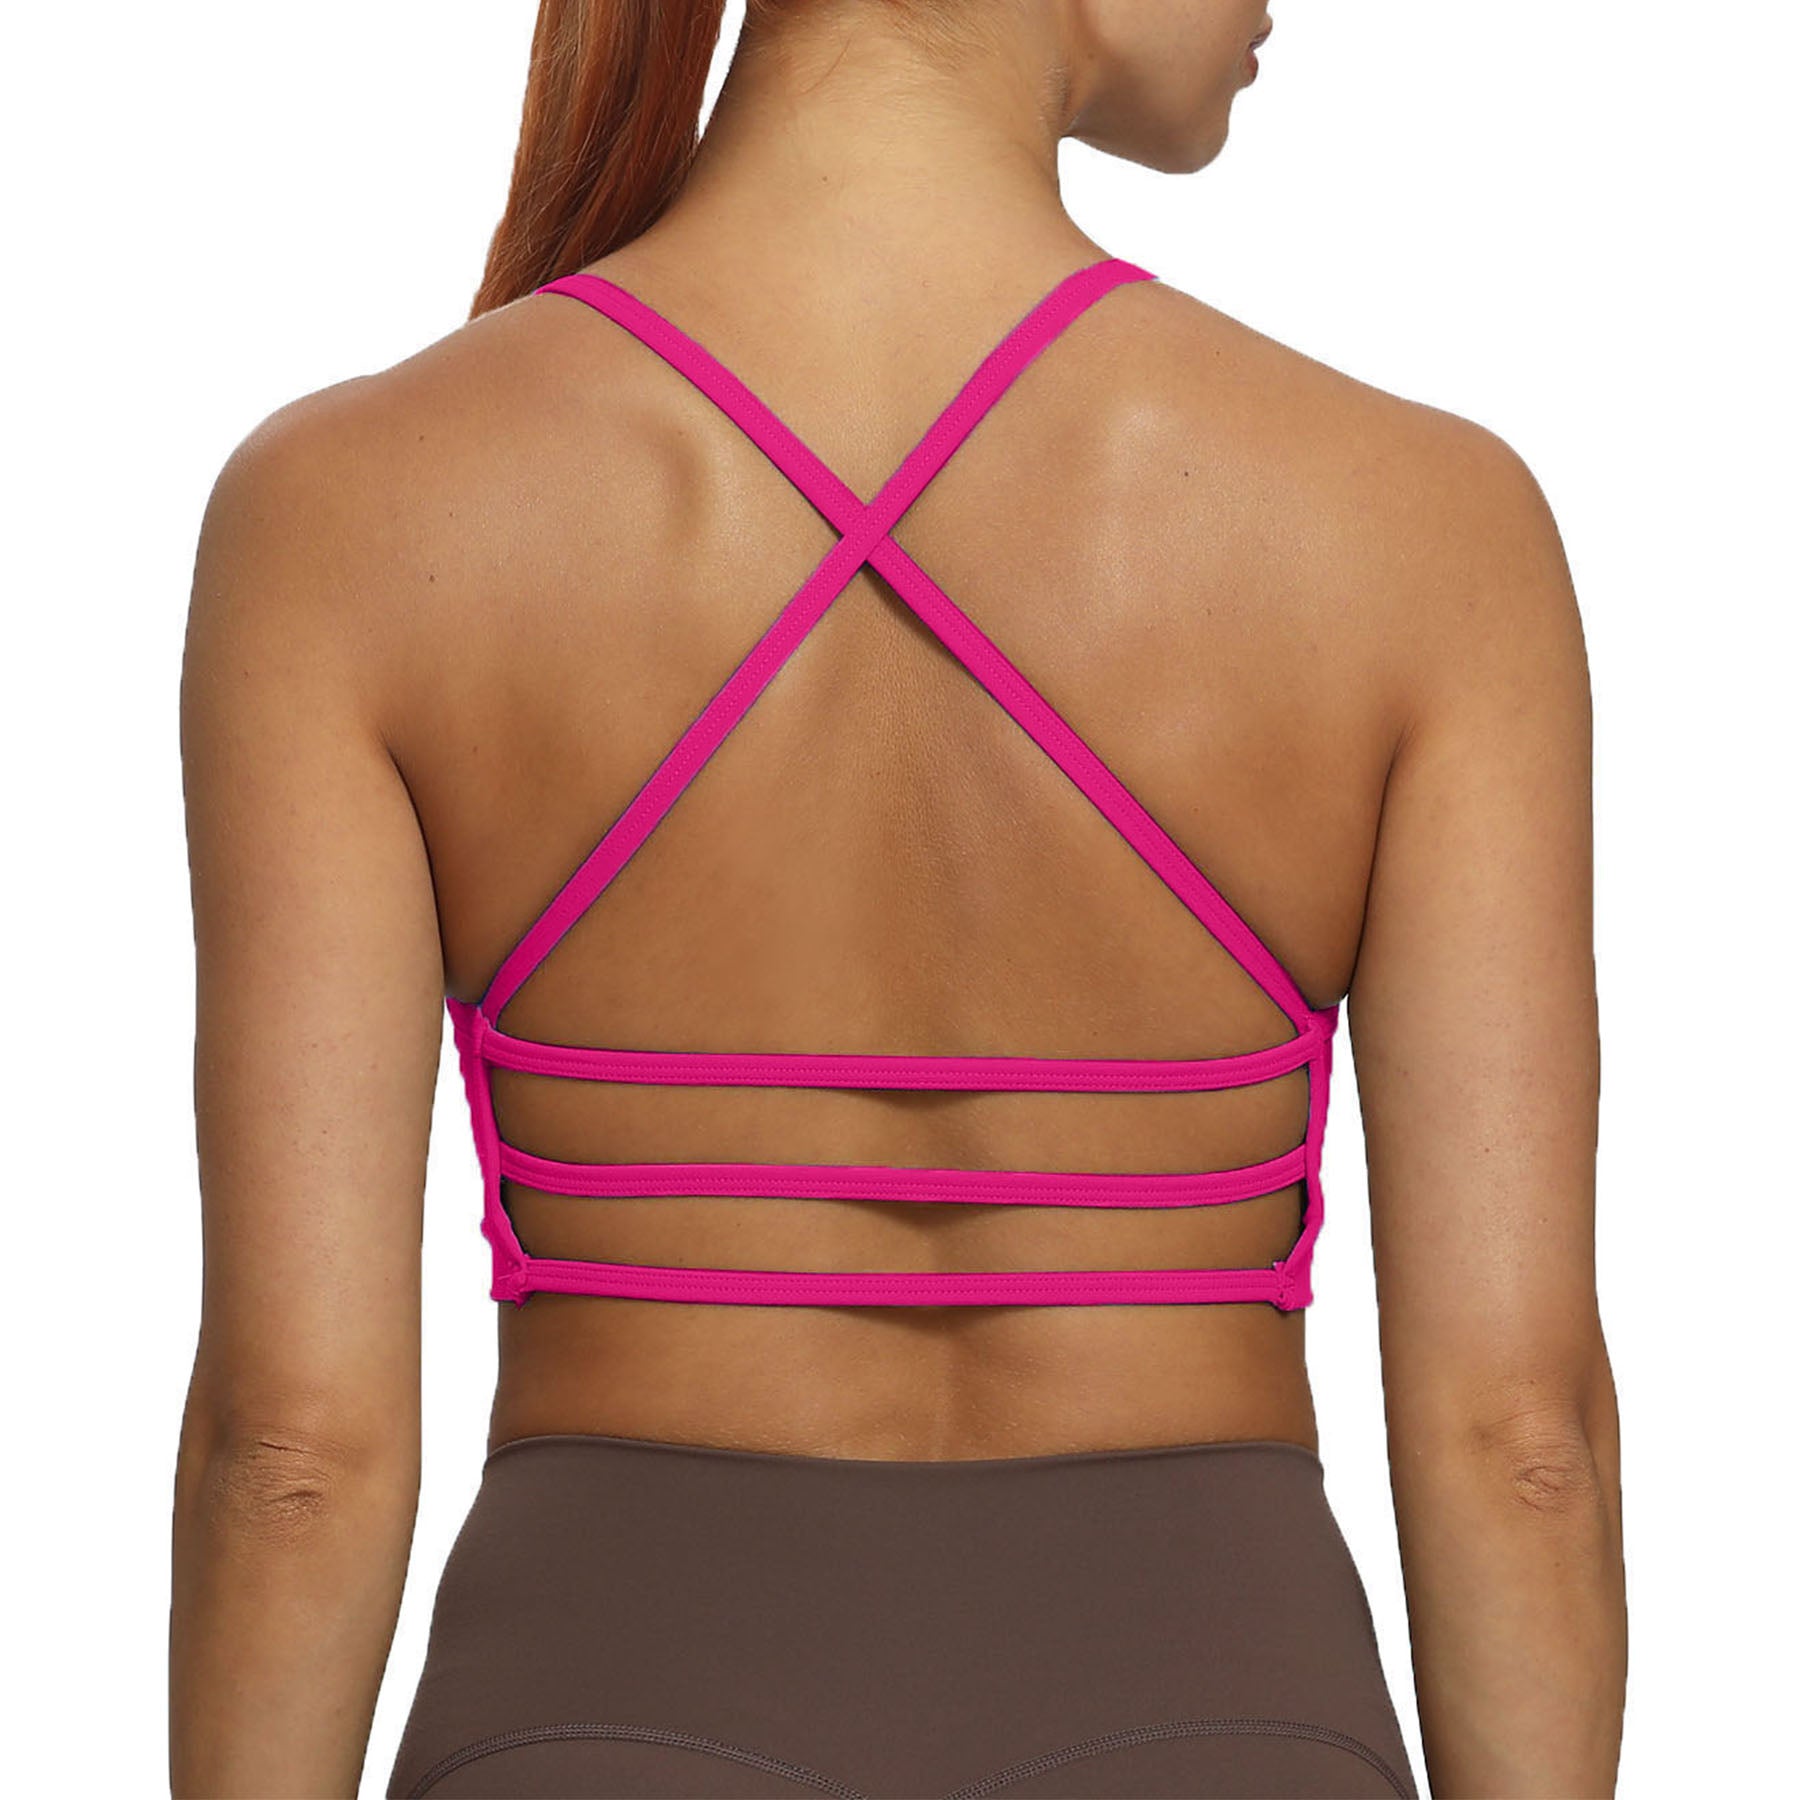 Aoxjox Sports Bra Red Size XS - $15 (53% Off Retail) - From Samantha